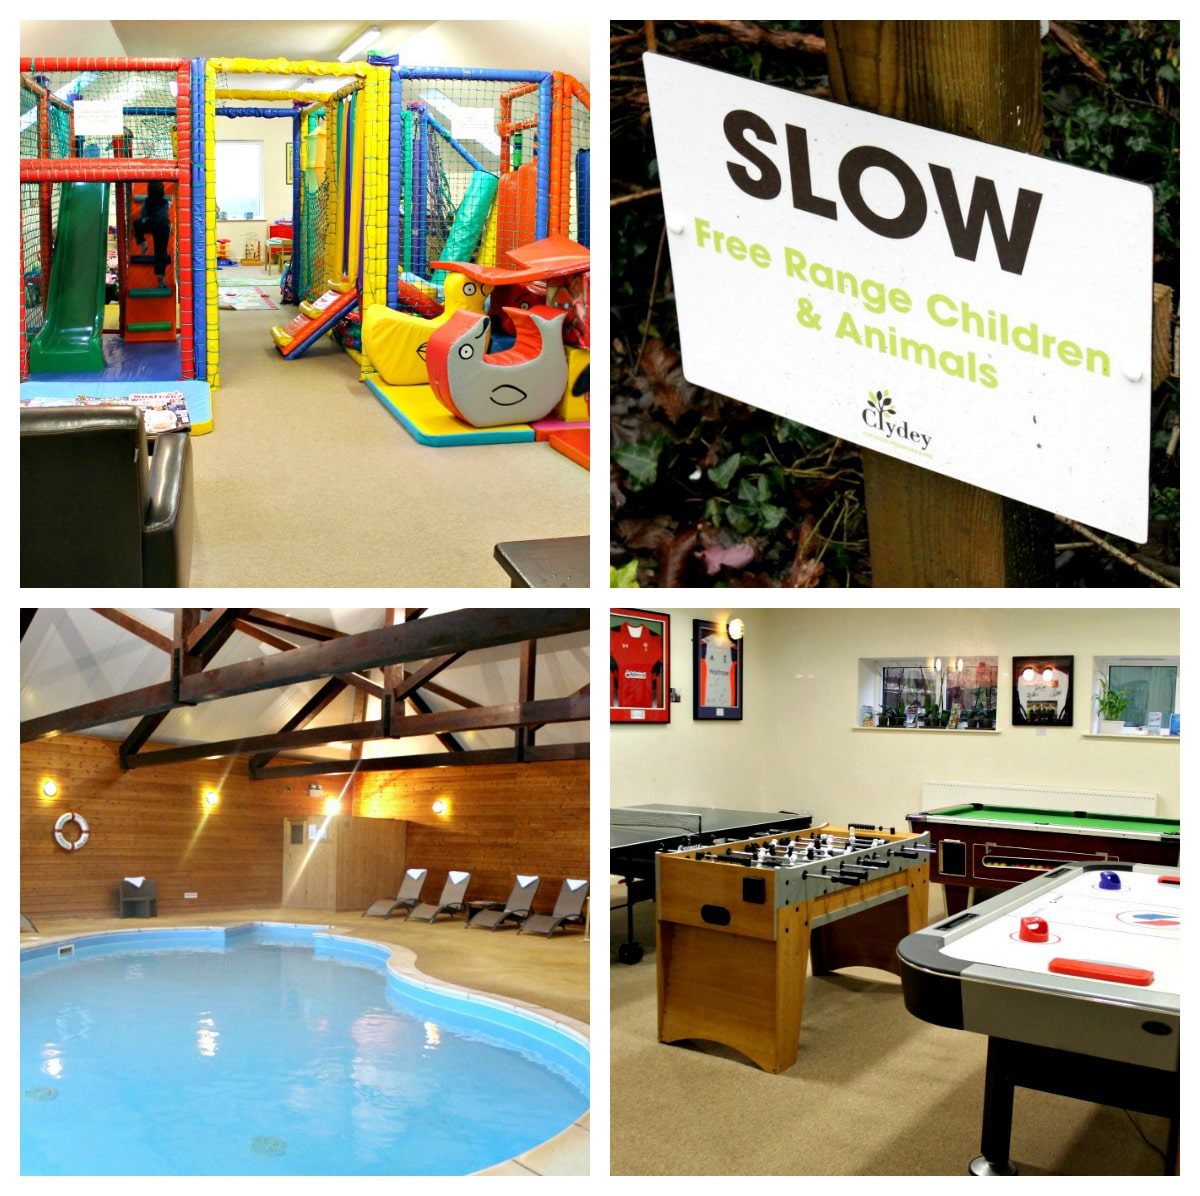 Amazing amenities abound at Clydey, from an indoor pool to numerous play areas.